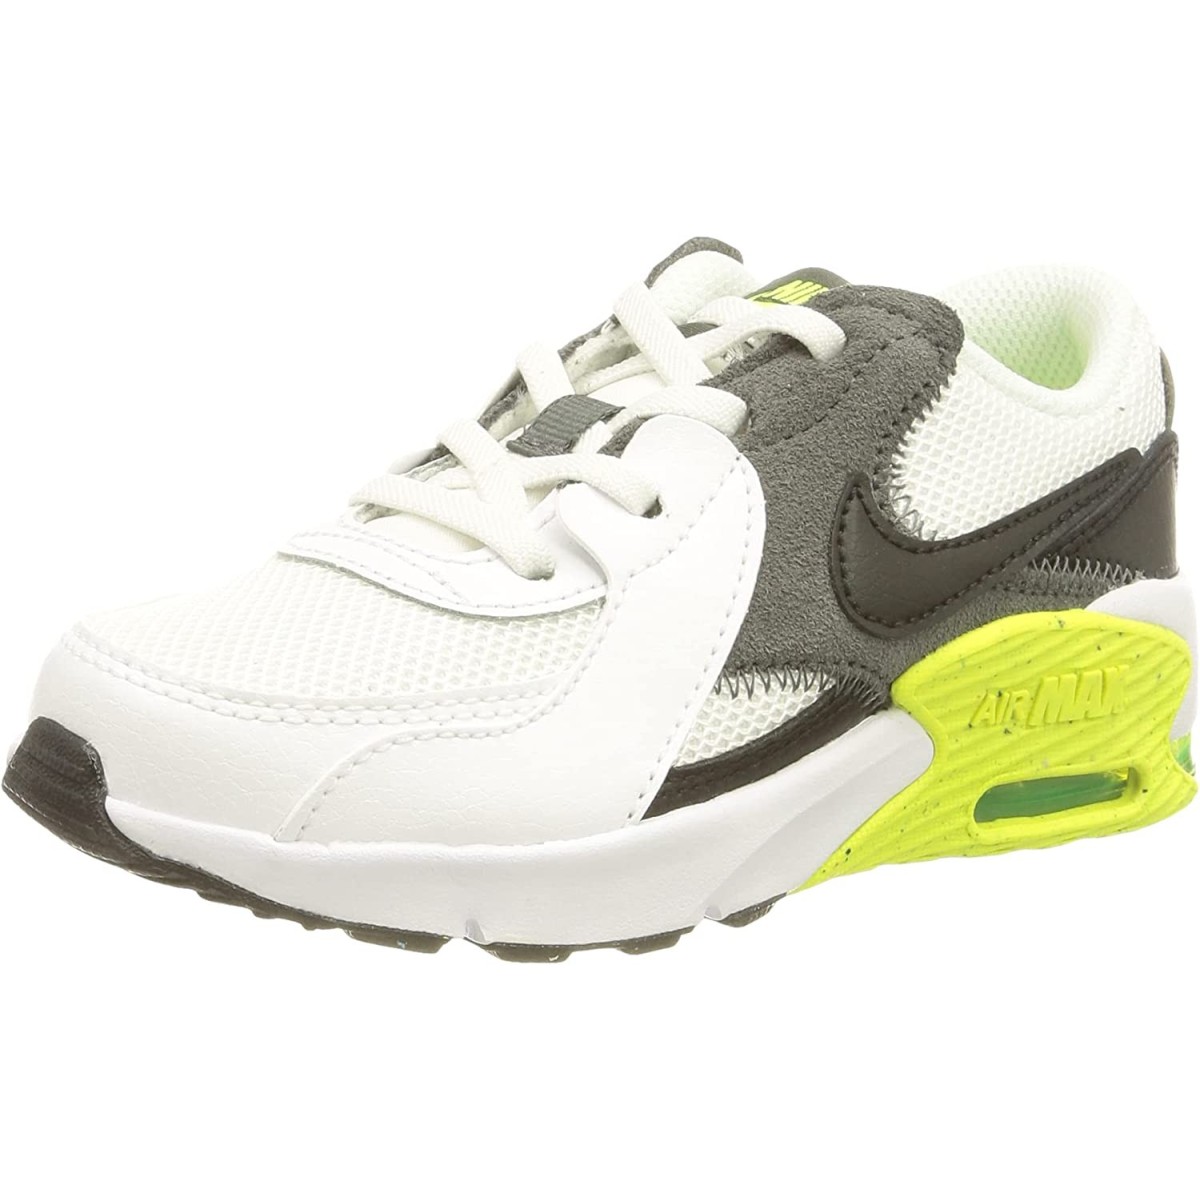 grey-volt NIKE CD6892 110 Shoes MAX AIR (PS) EXCEE white/black-iron